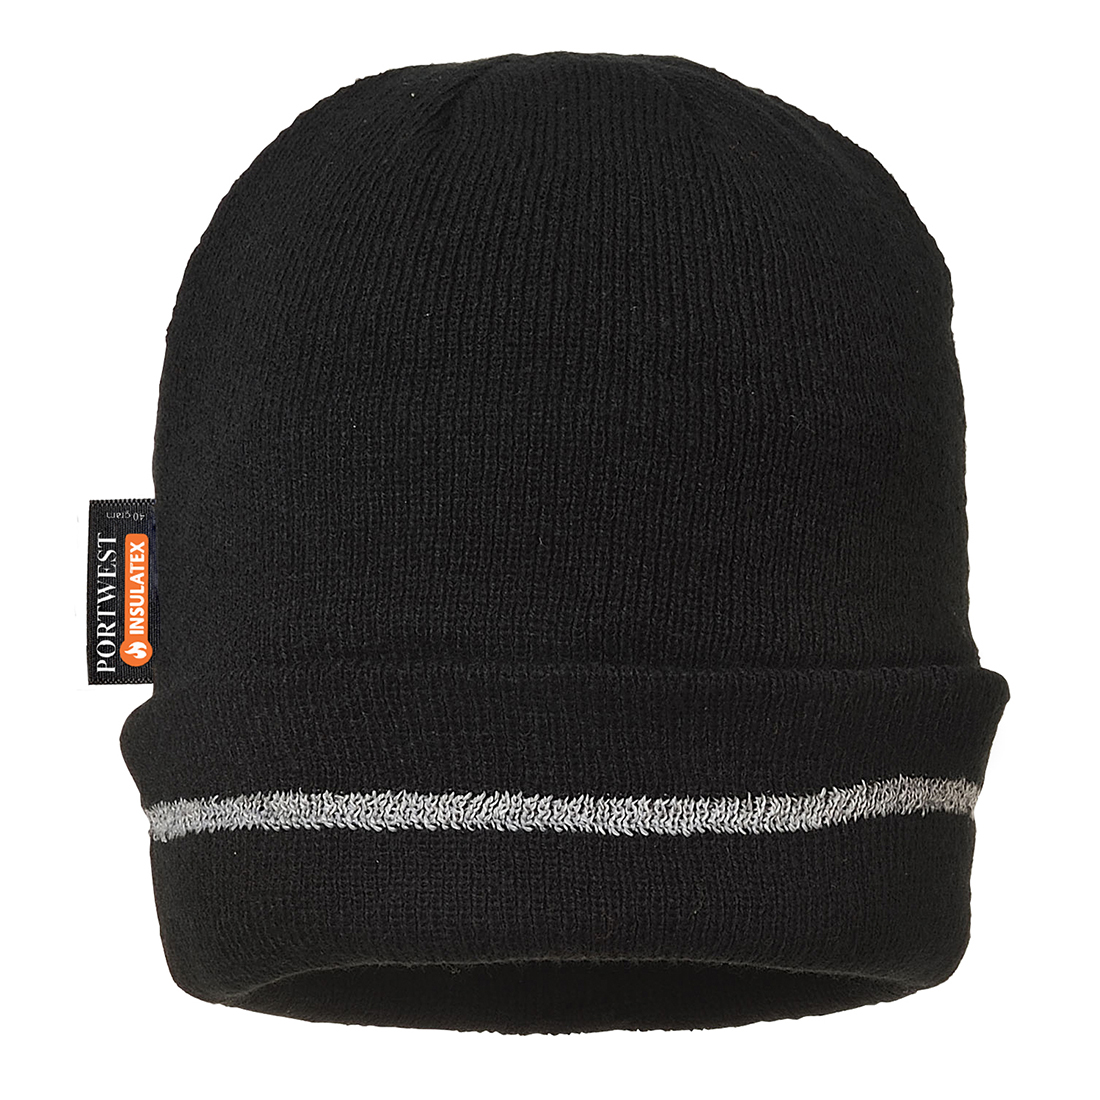 Reflective Trim Knit Hat Insulatex Lined Size  Black